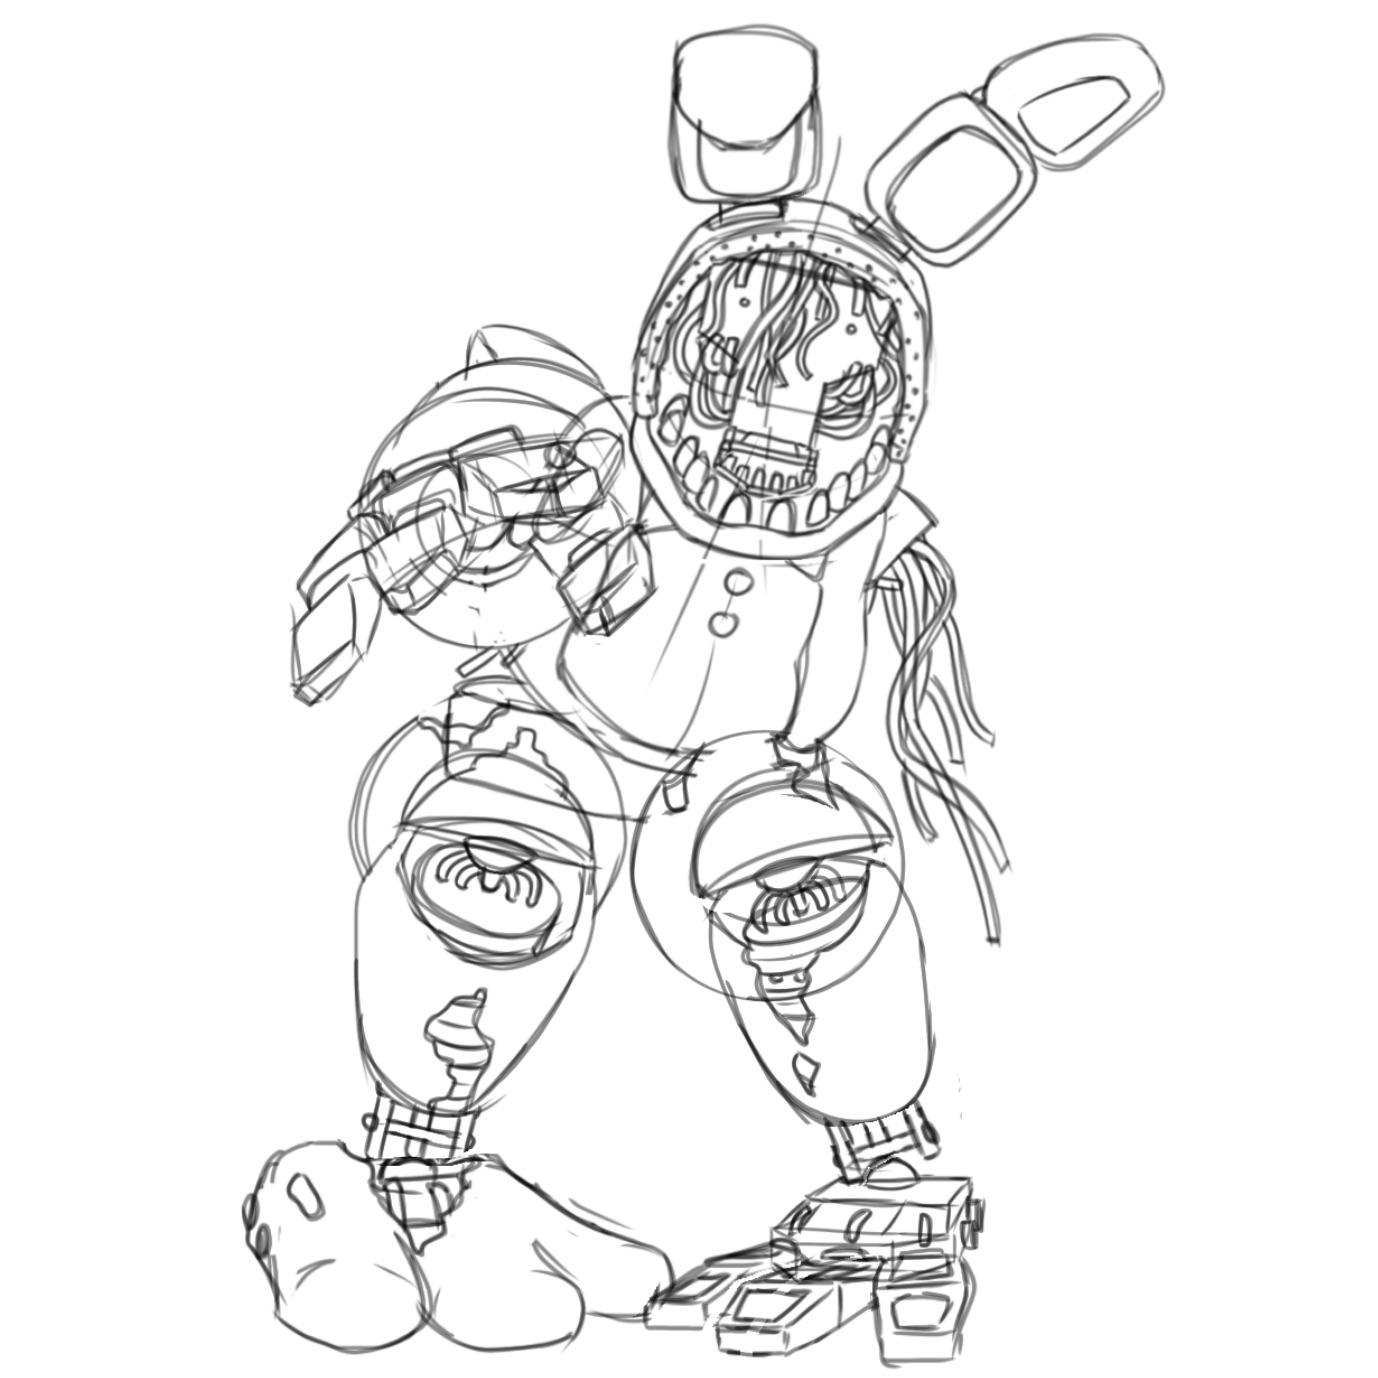 Withered bonnie : r/fivenightsatfreddys